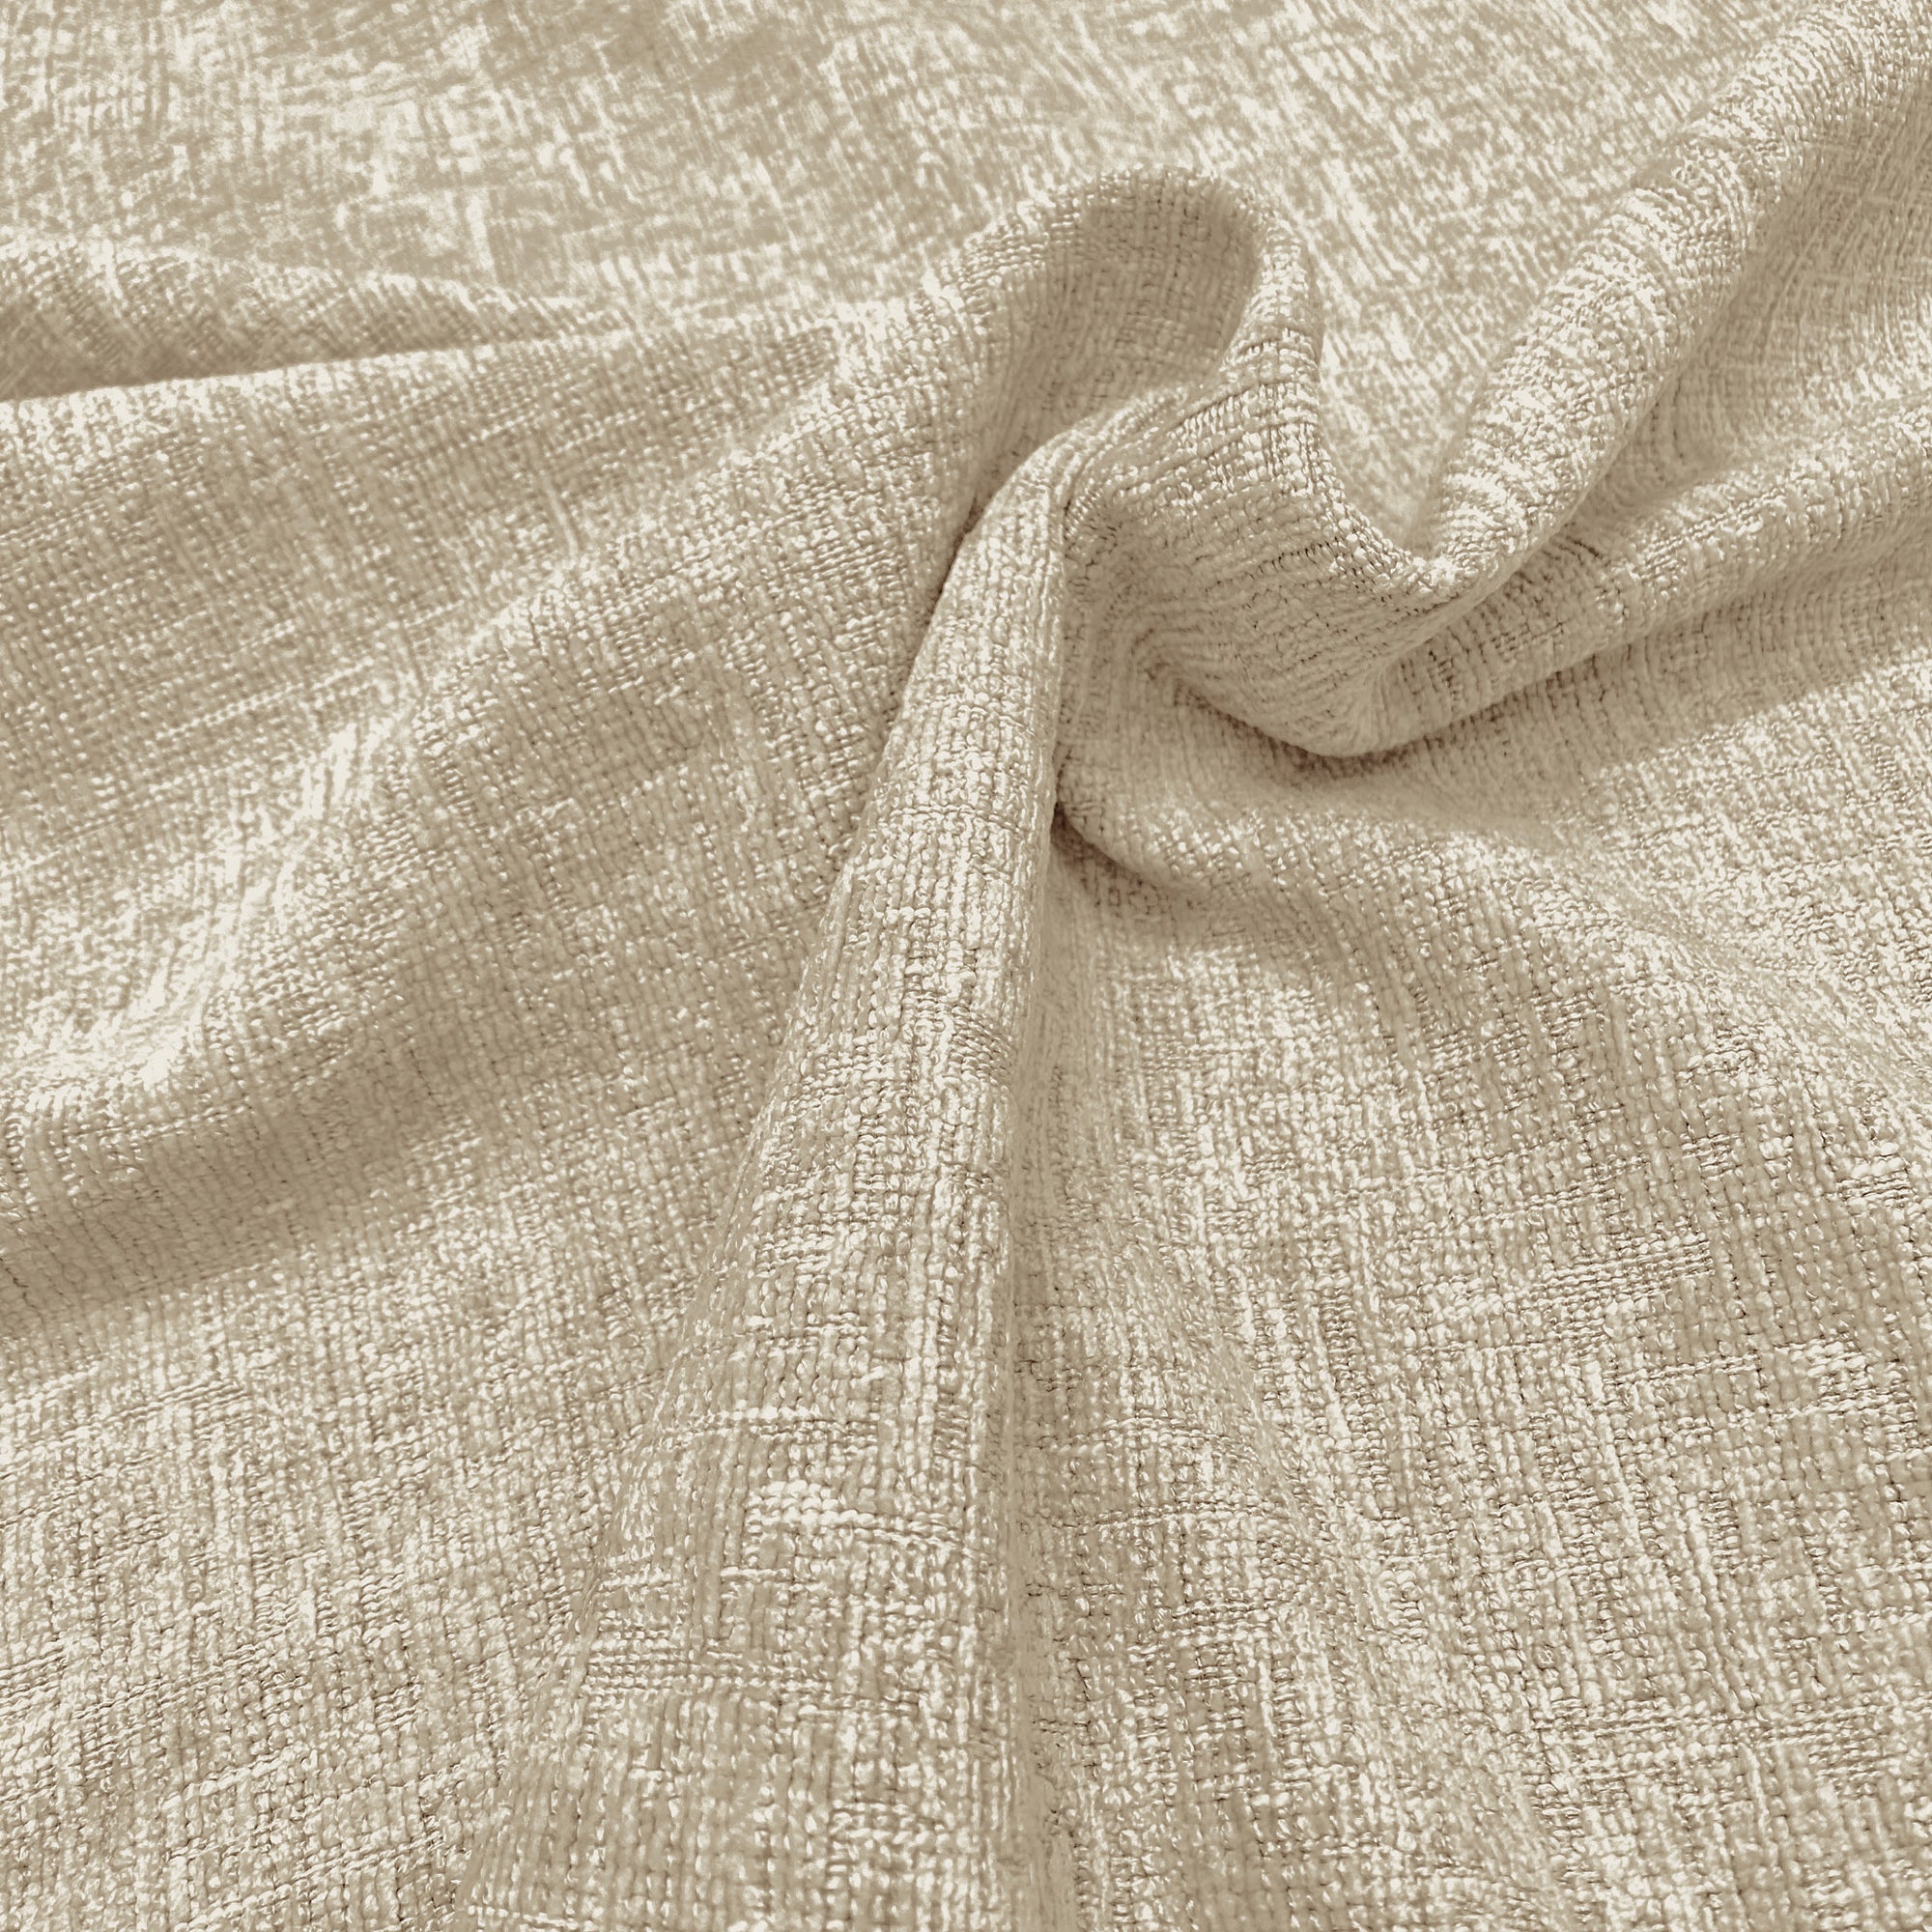 Peachtree Fabrics Beige Solid Color Chenille Upholstery Fabric by Decorative Fabrics Direct